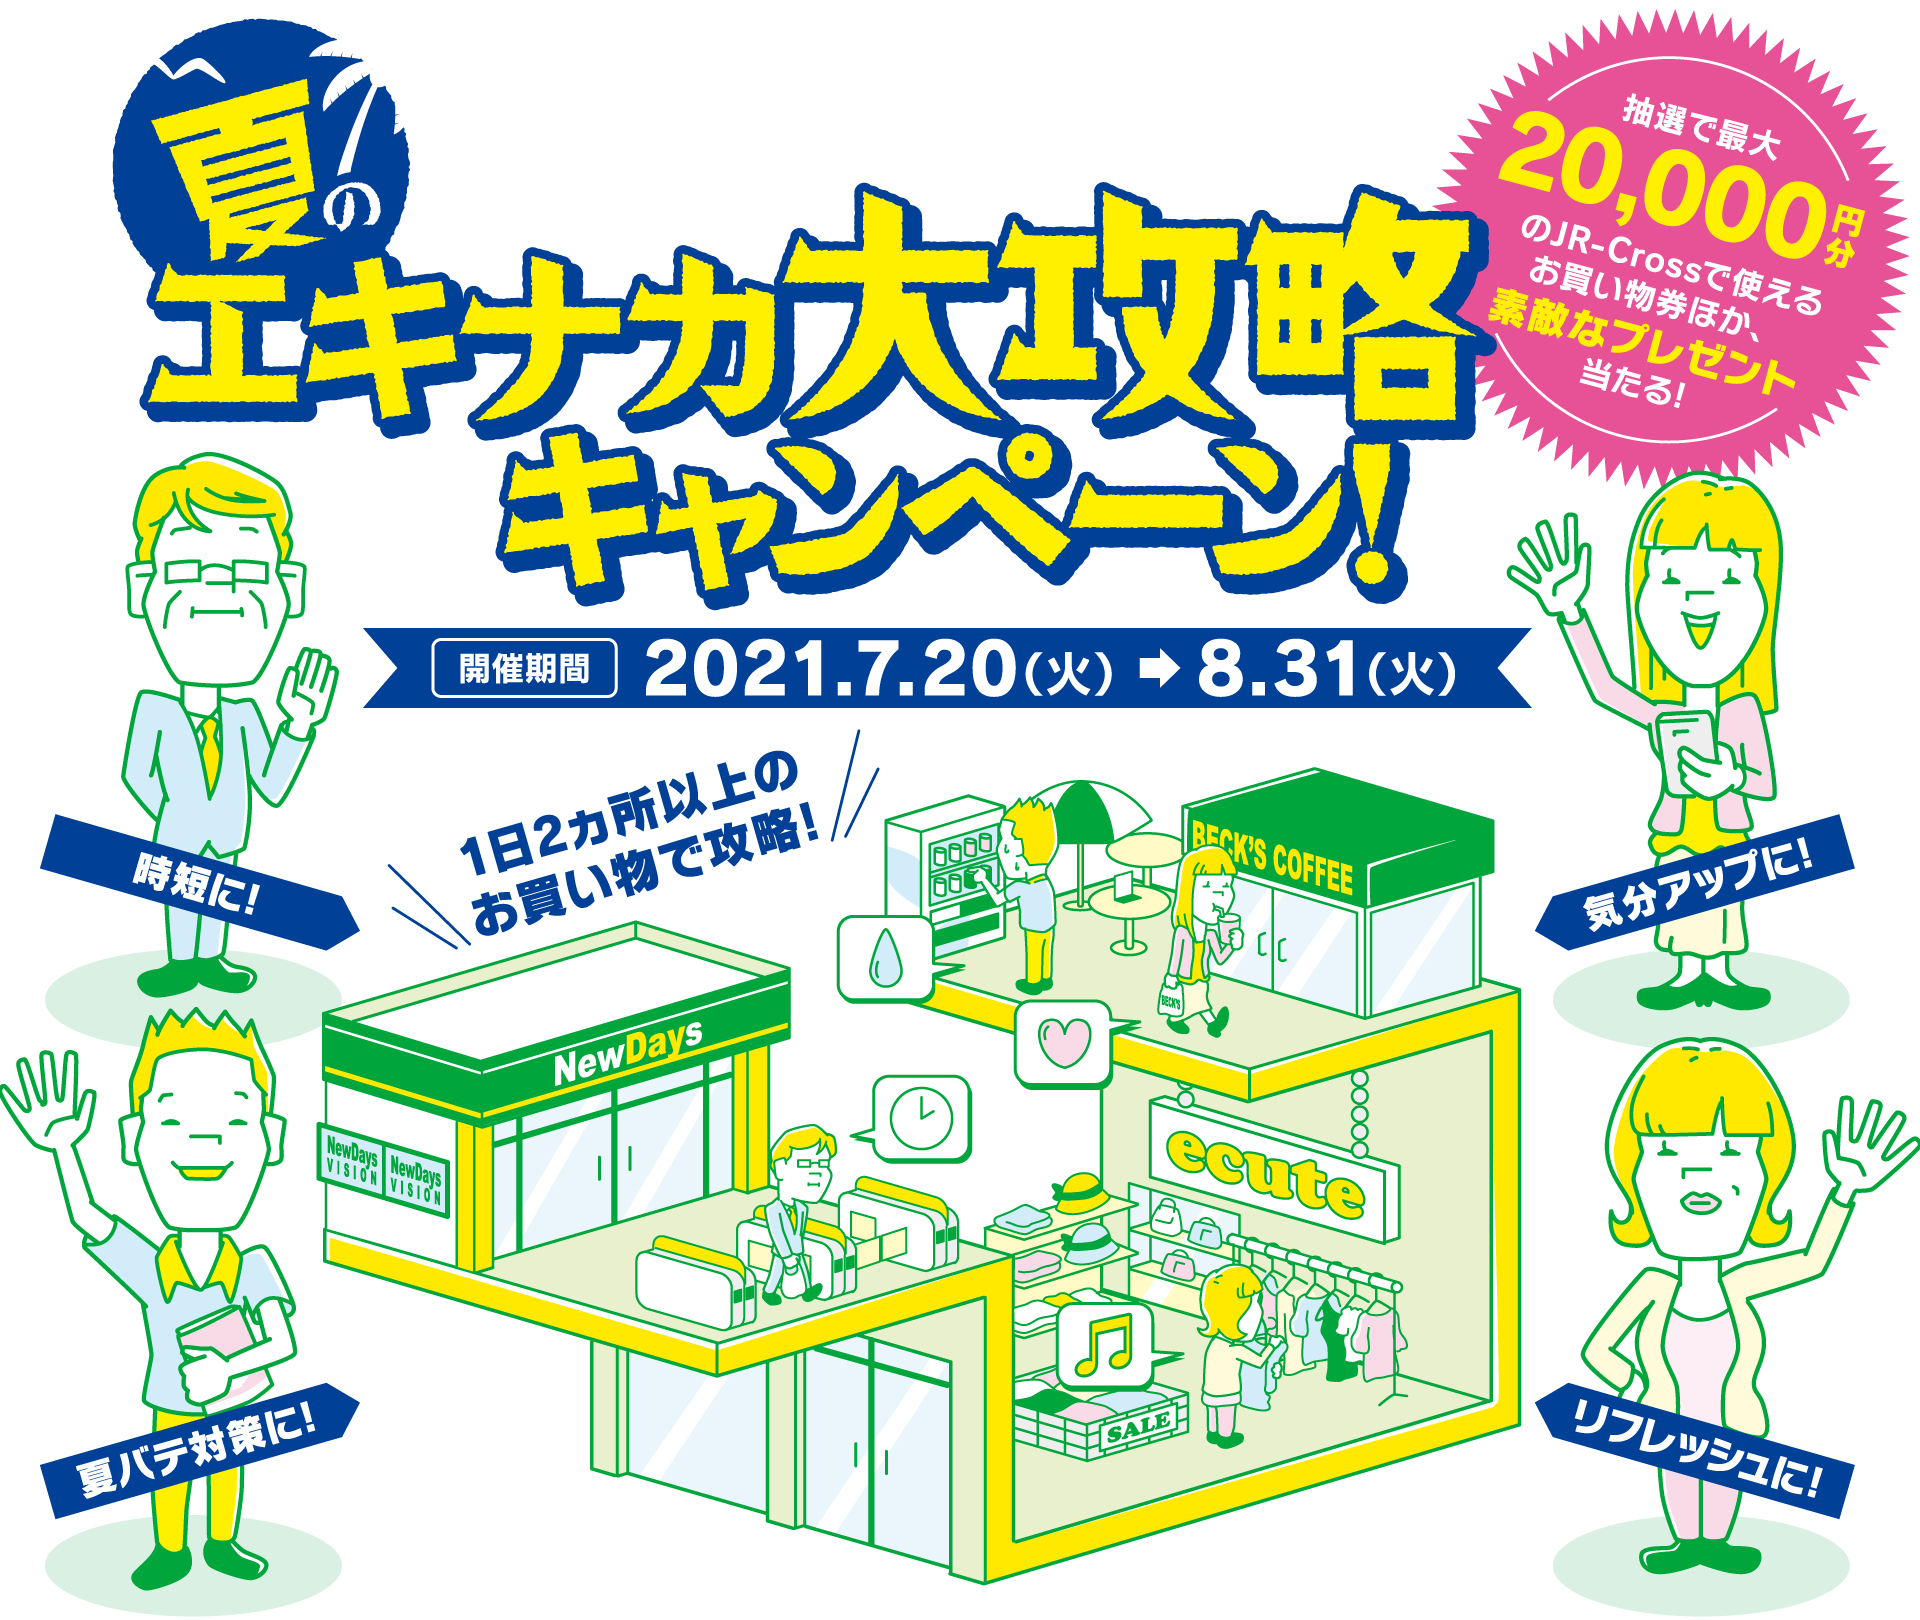 Let's master EKINAKA! EKINAKA Great Strategy Campaign You can win up to 20,000 yen worth of shopping at JR-Cross by lottery, as well as a wonderful gift! Holding period 2021.7.20 (Tuesday) → 8.31 (Tuesday)